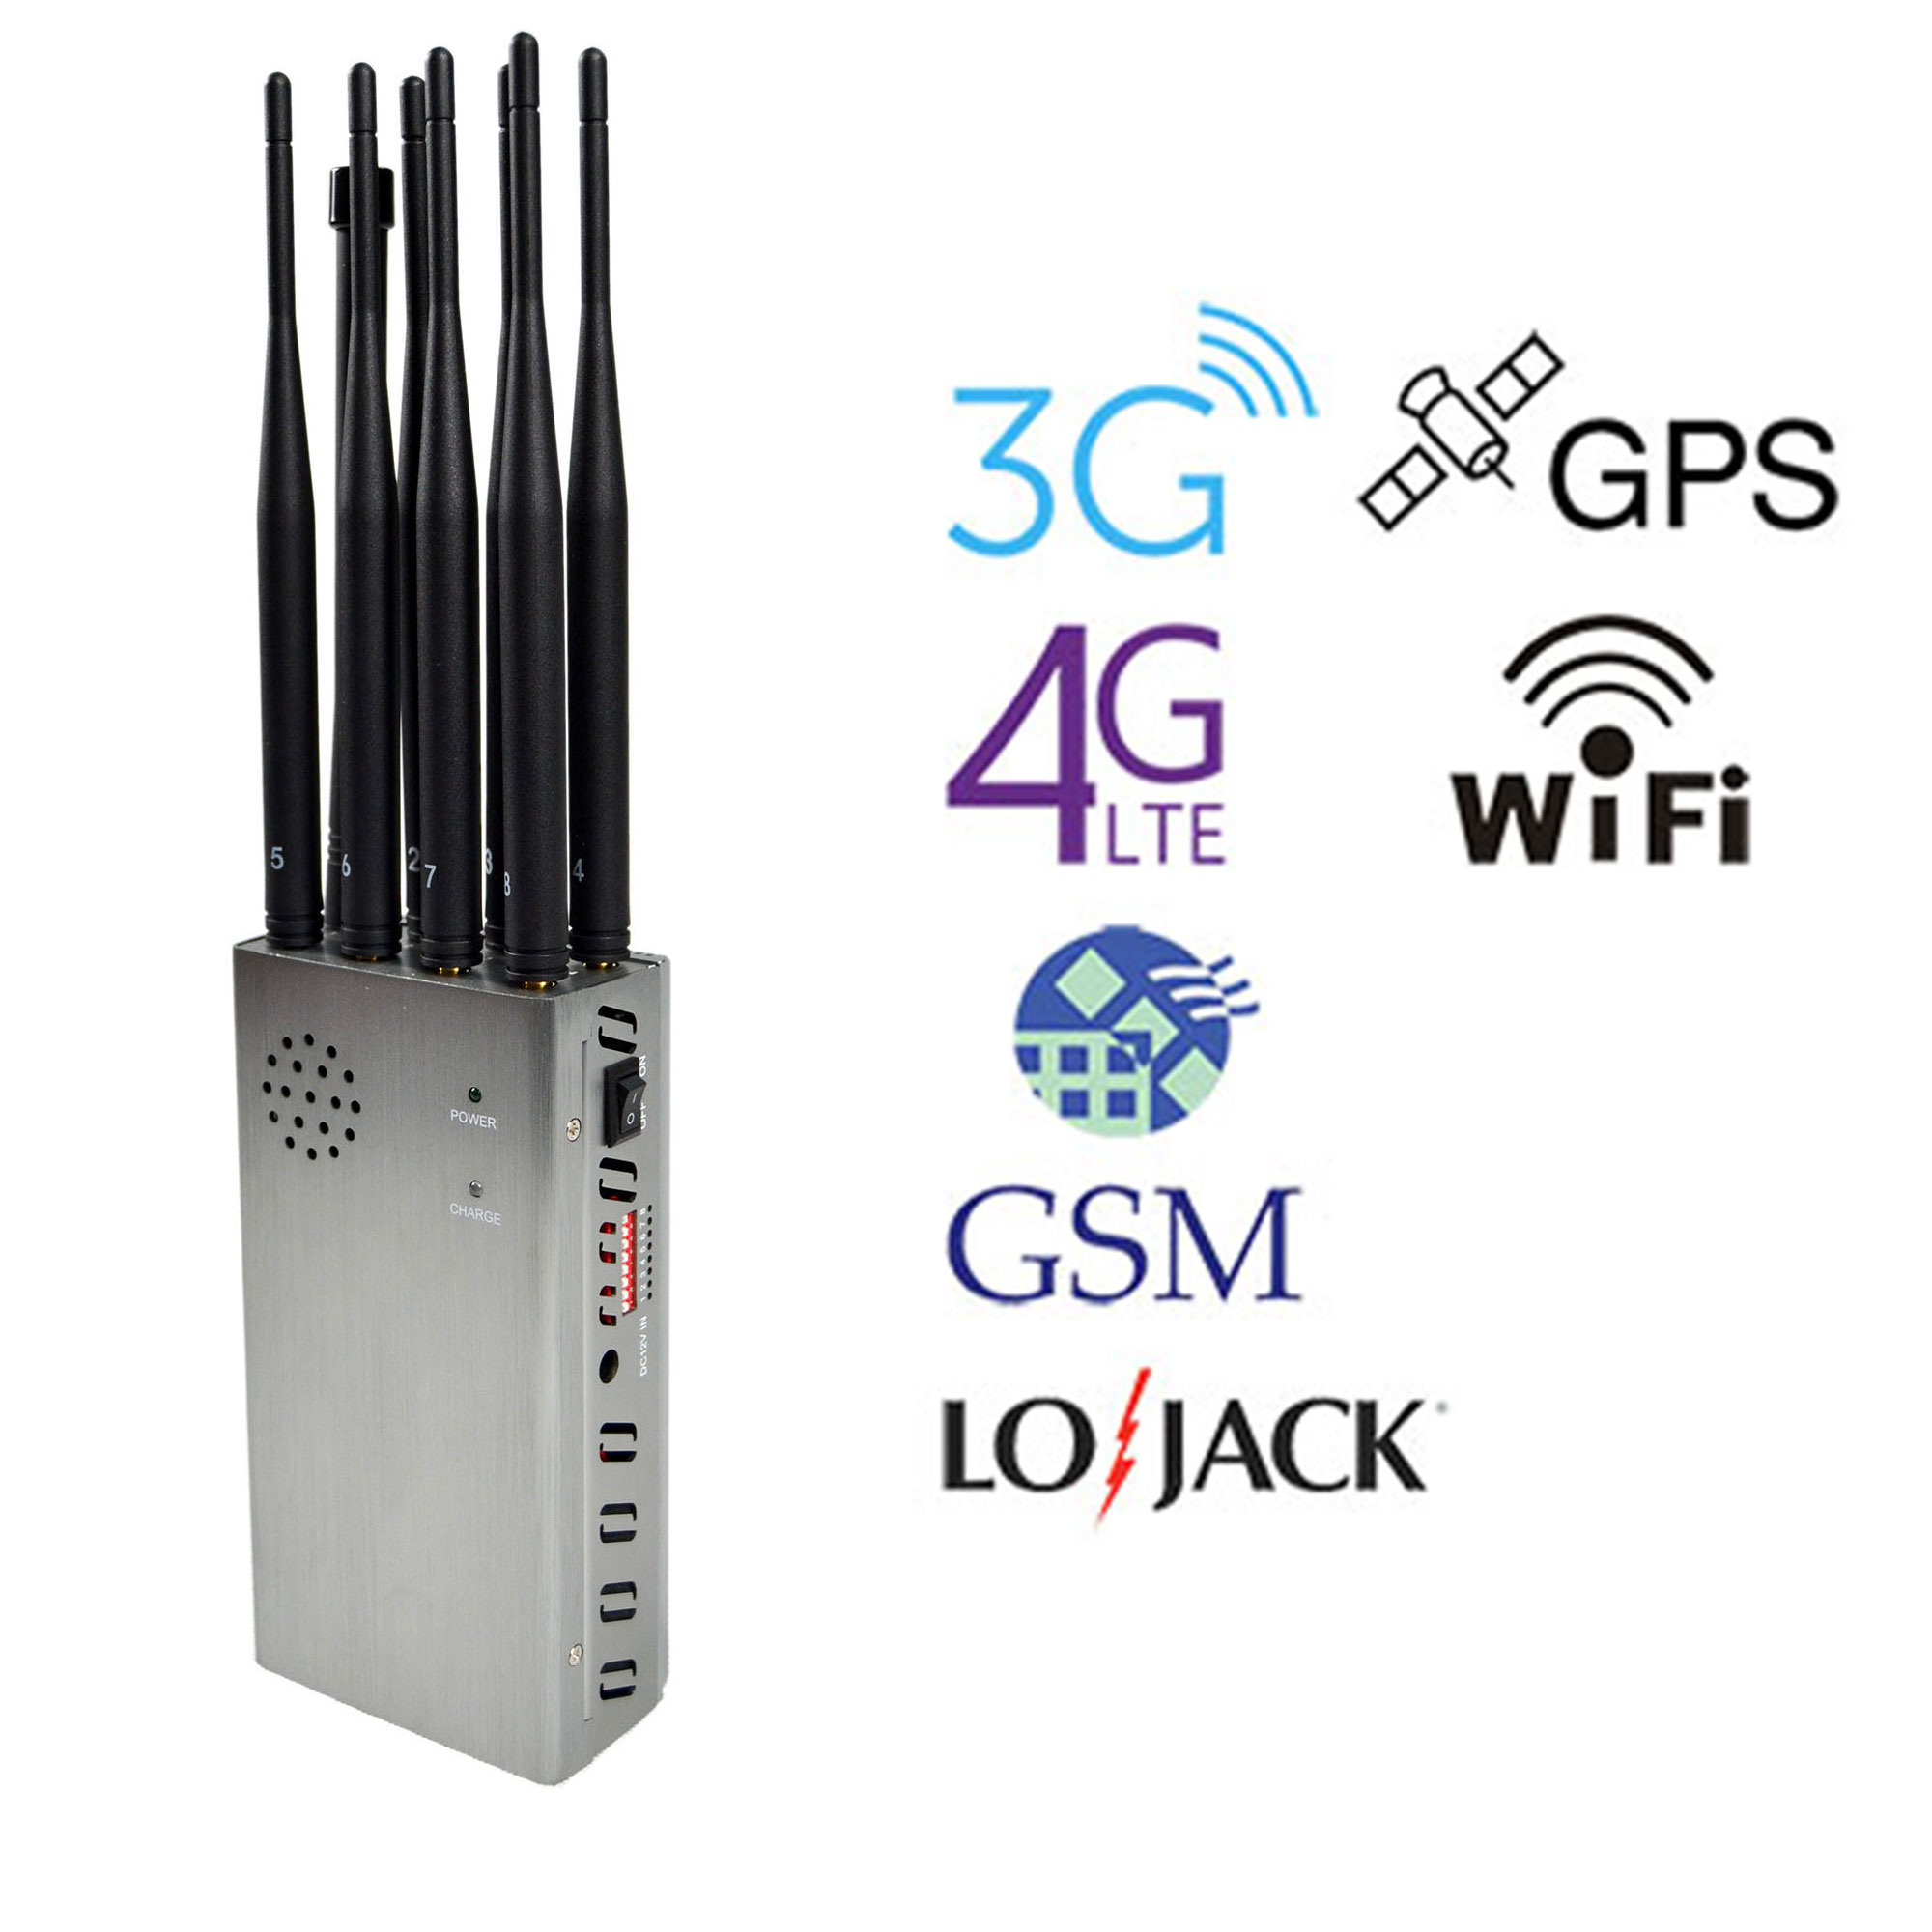 lidar radar jammer legality | Portable 8 Antennas Cell Phone Jammers With 2g 3G 4G And LOJACK GPS WIFI Signals